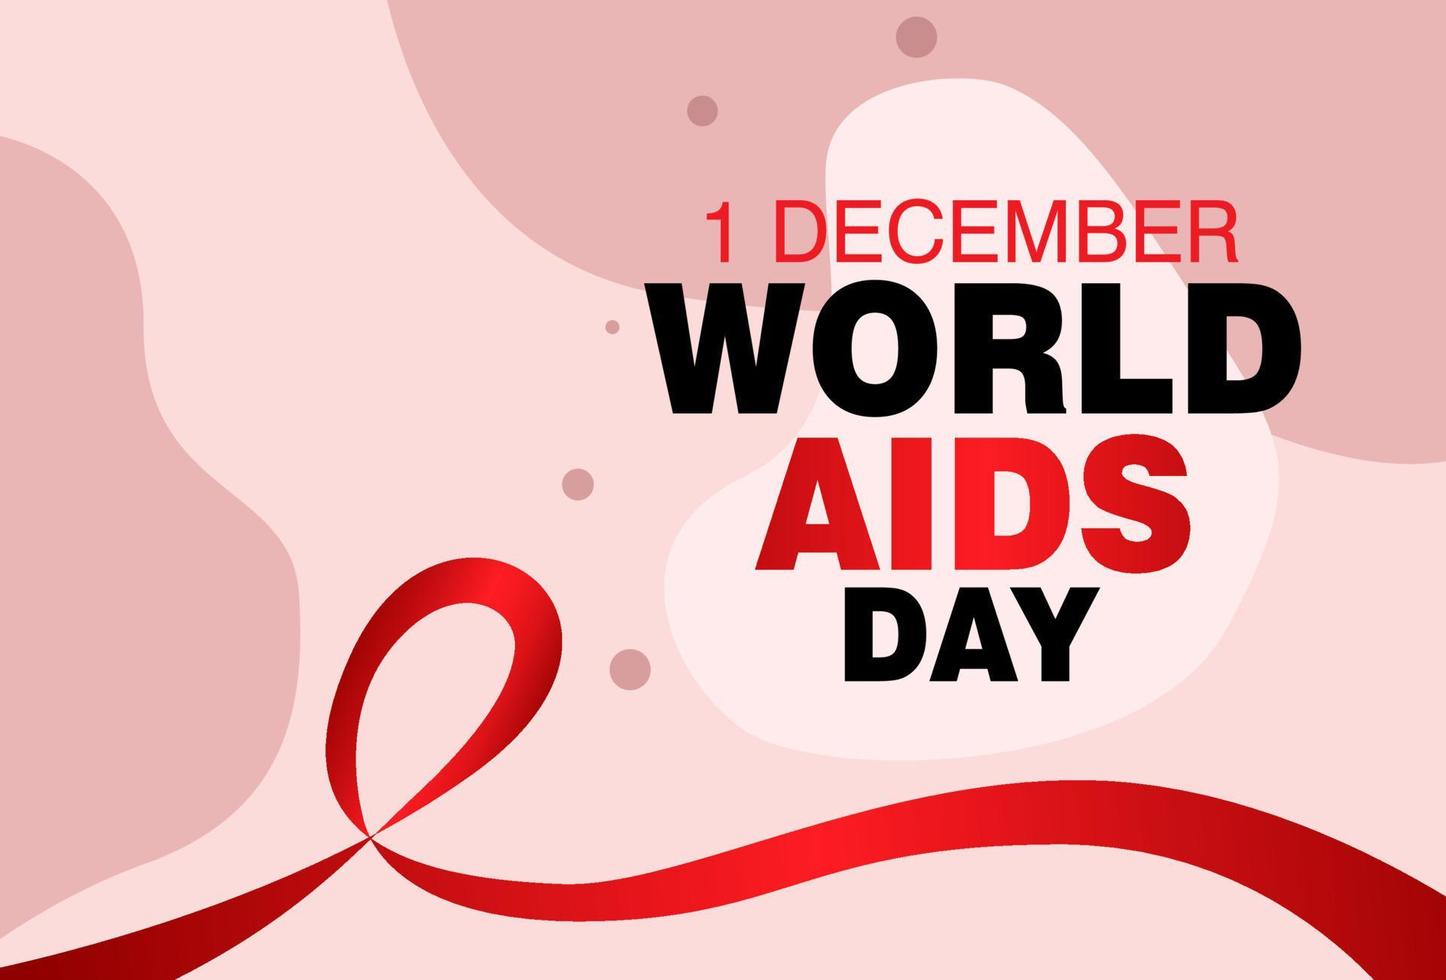 world aids day greeting design. designs for banner and poster templates. vector